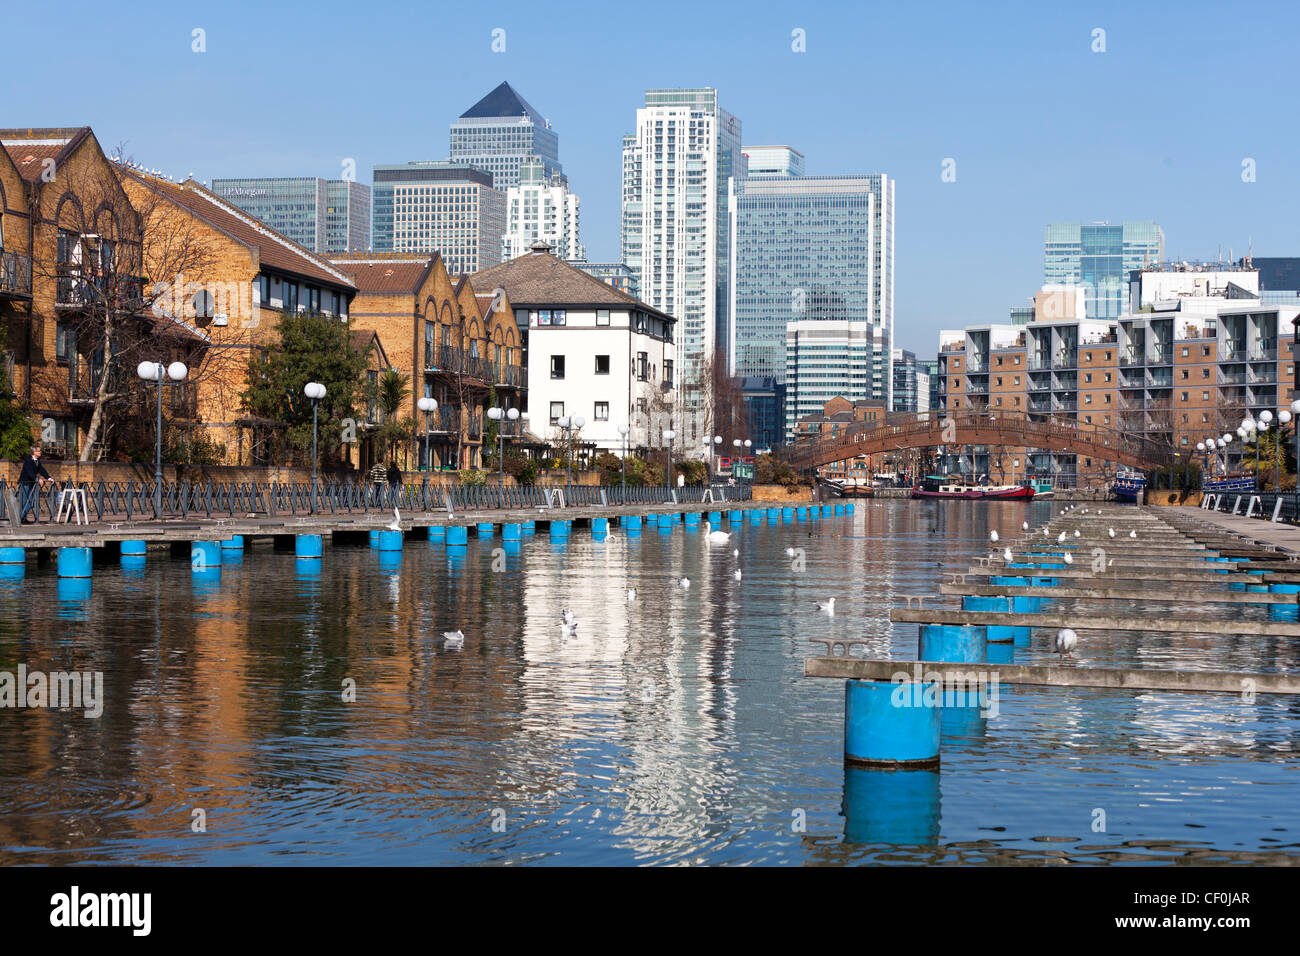 Clippers Quay marina, part of Millwall Outer Dock with Canary wharf in the background, Isle of Dogs, Tower Hamlets, London, UK. Stock Photo